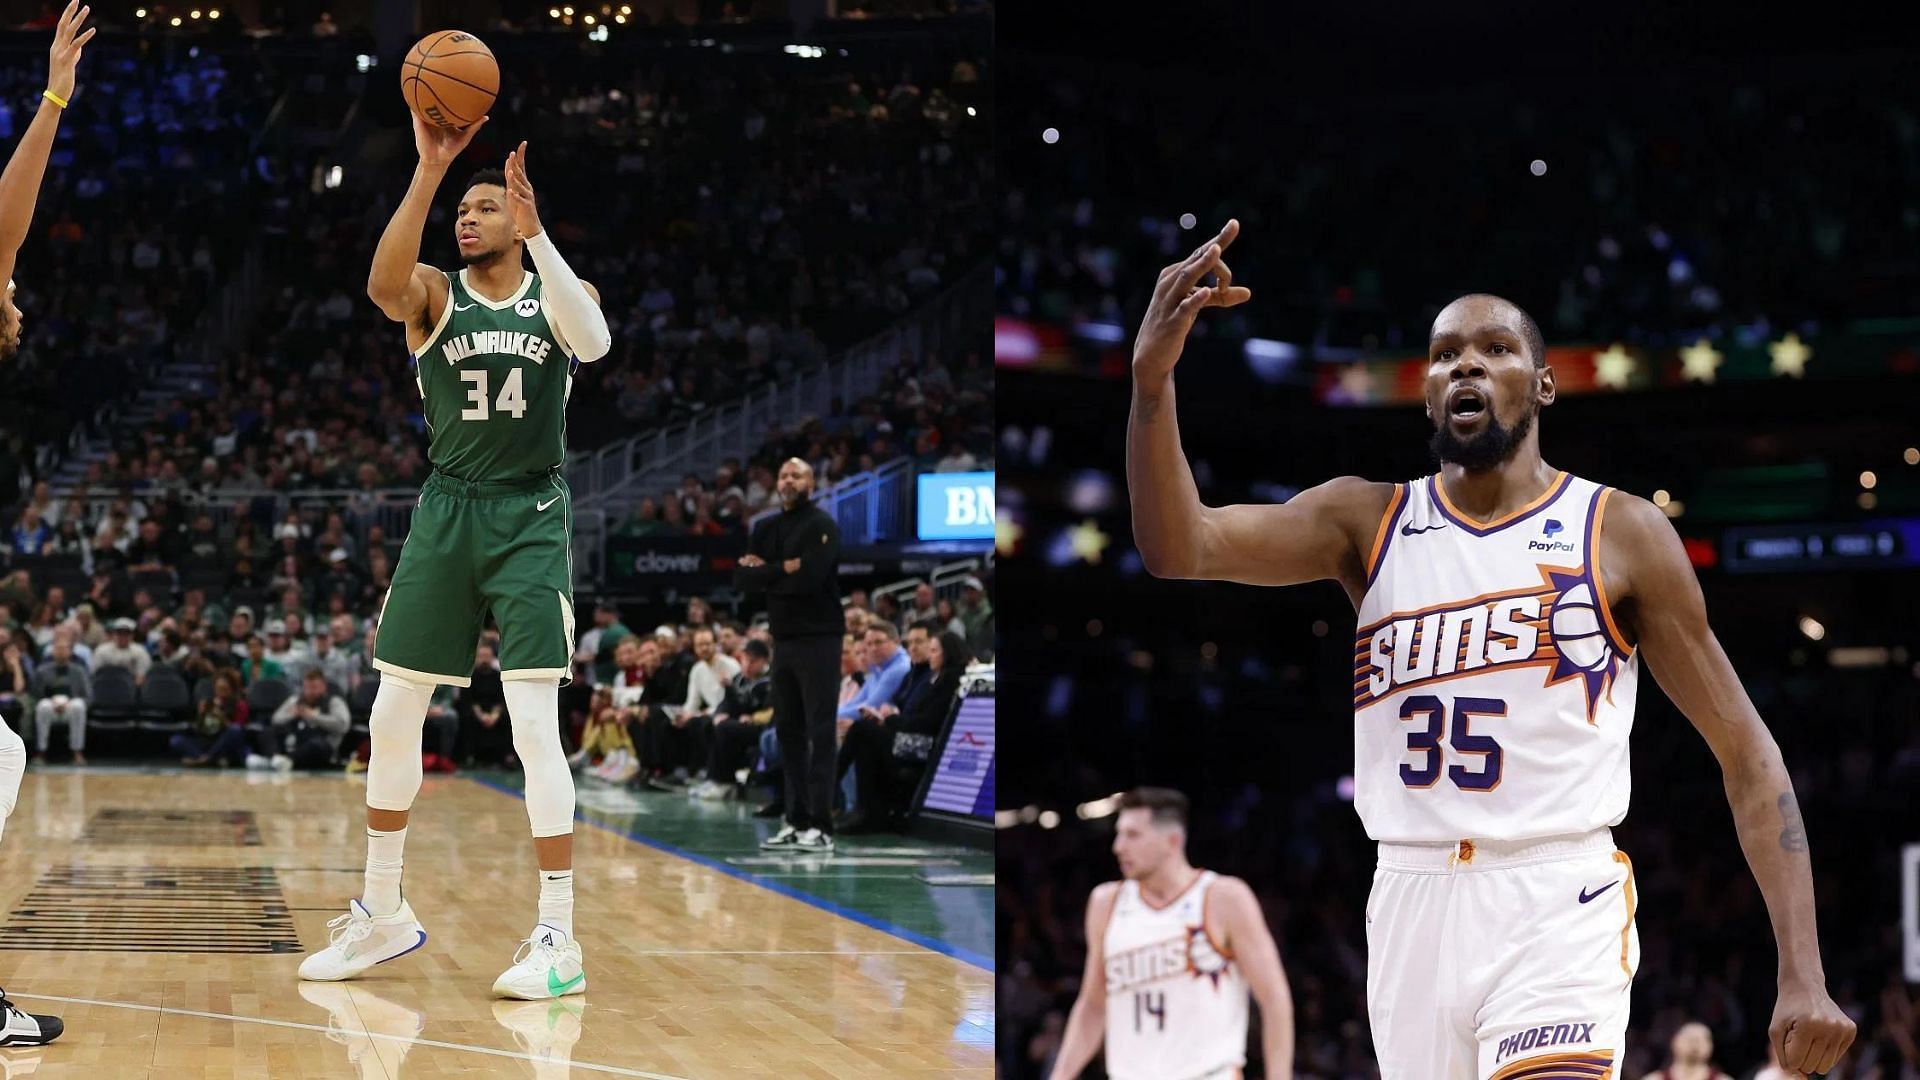 Top 5 active NBA players from Texas